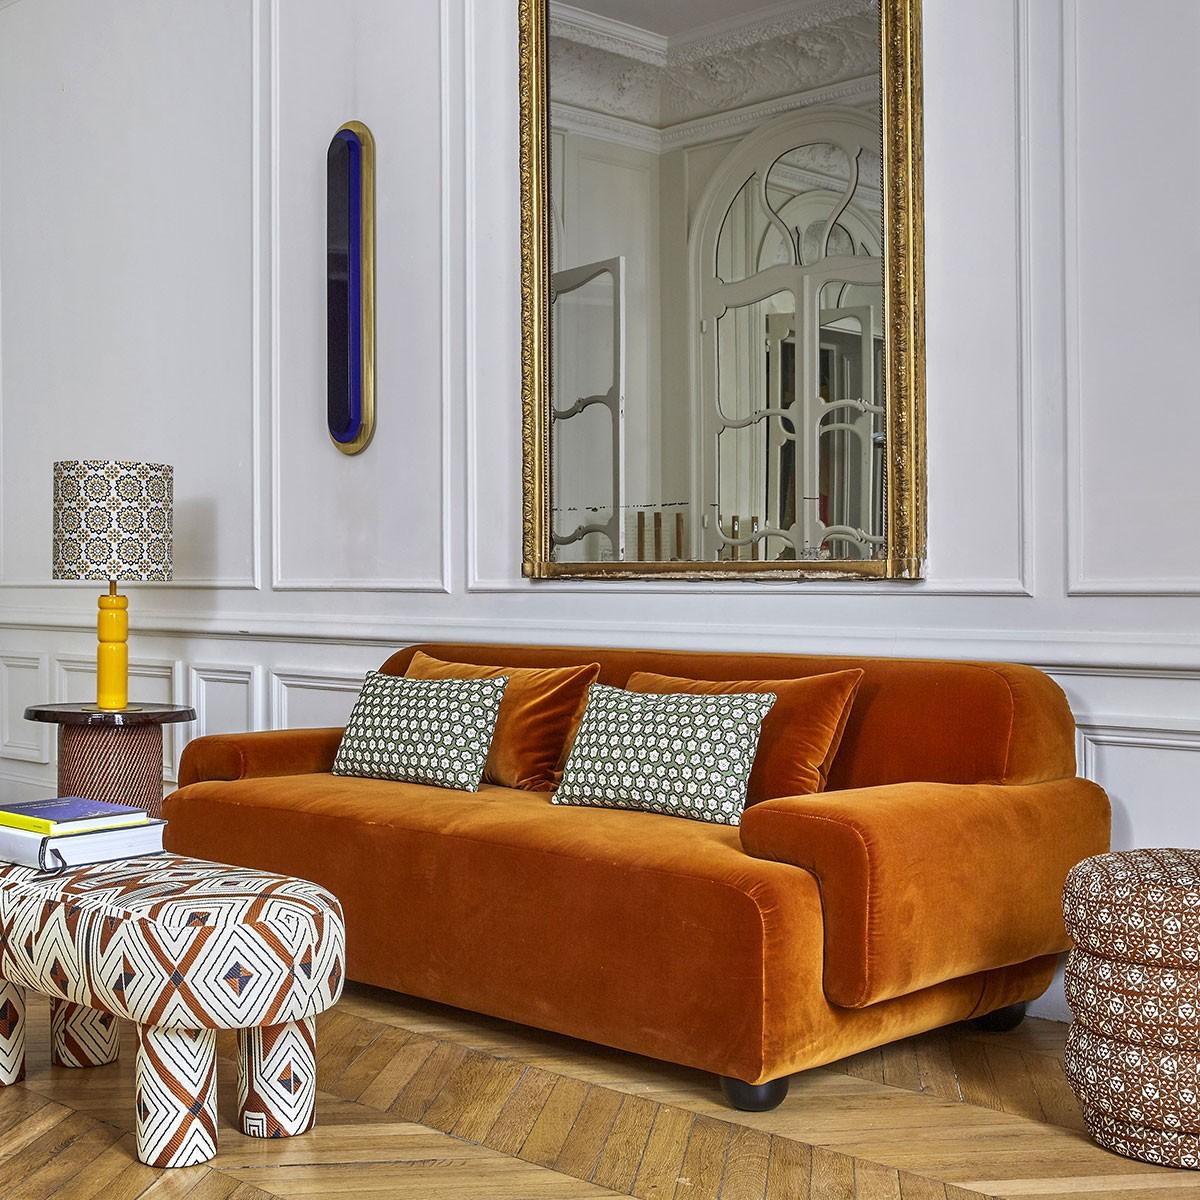 Popus Editions Lena 3 Seater Sofa in Citrine Marrakech Jacquard Upholstery In New Condition For Sale In Paris, FR